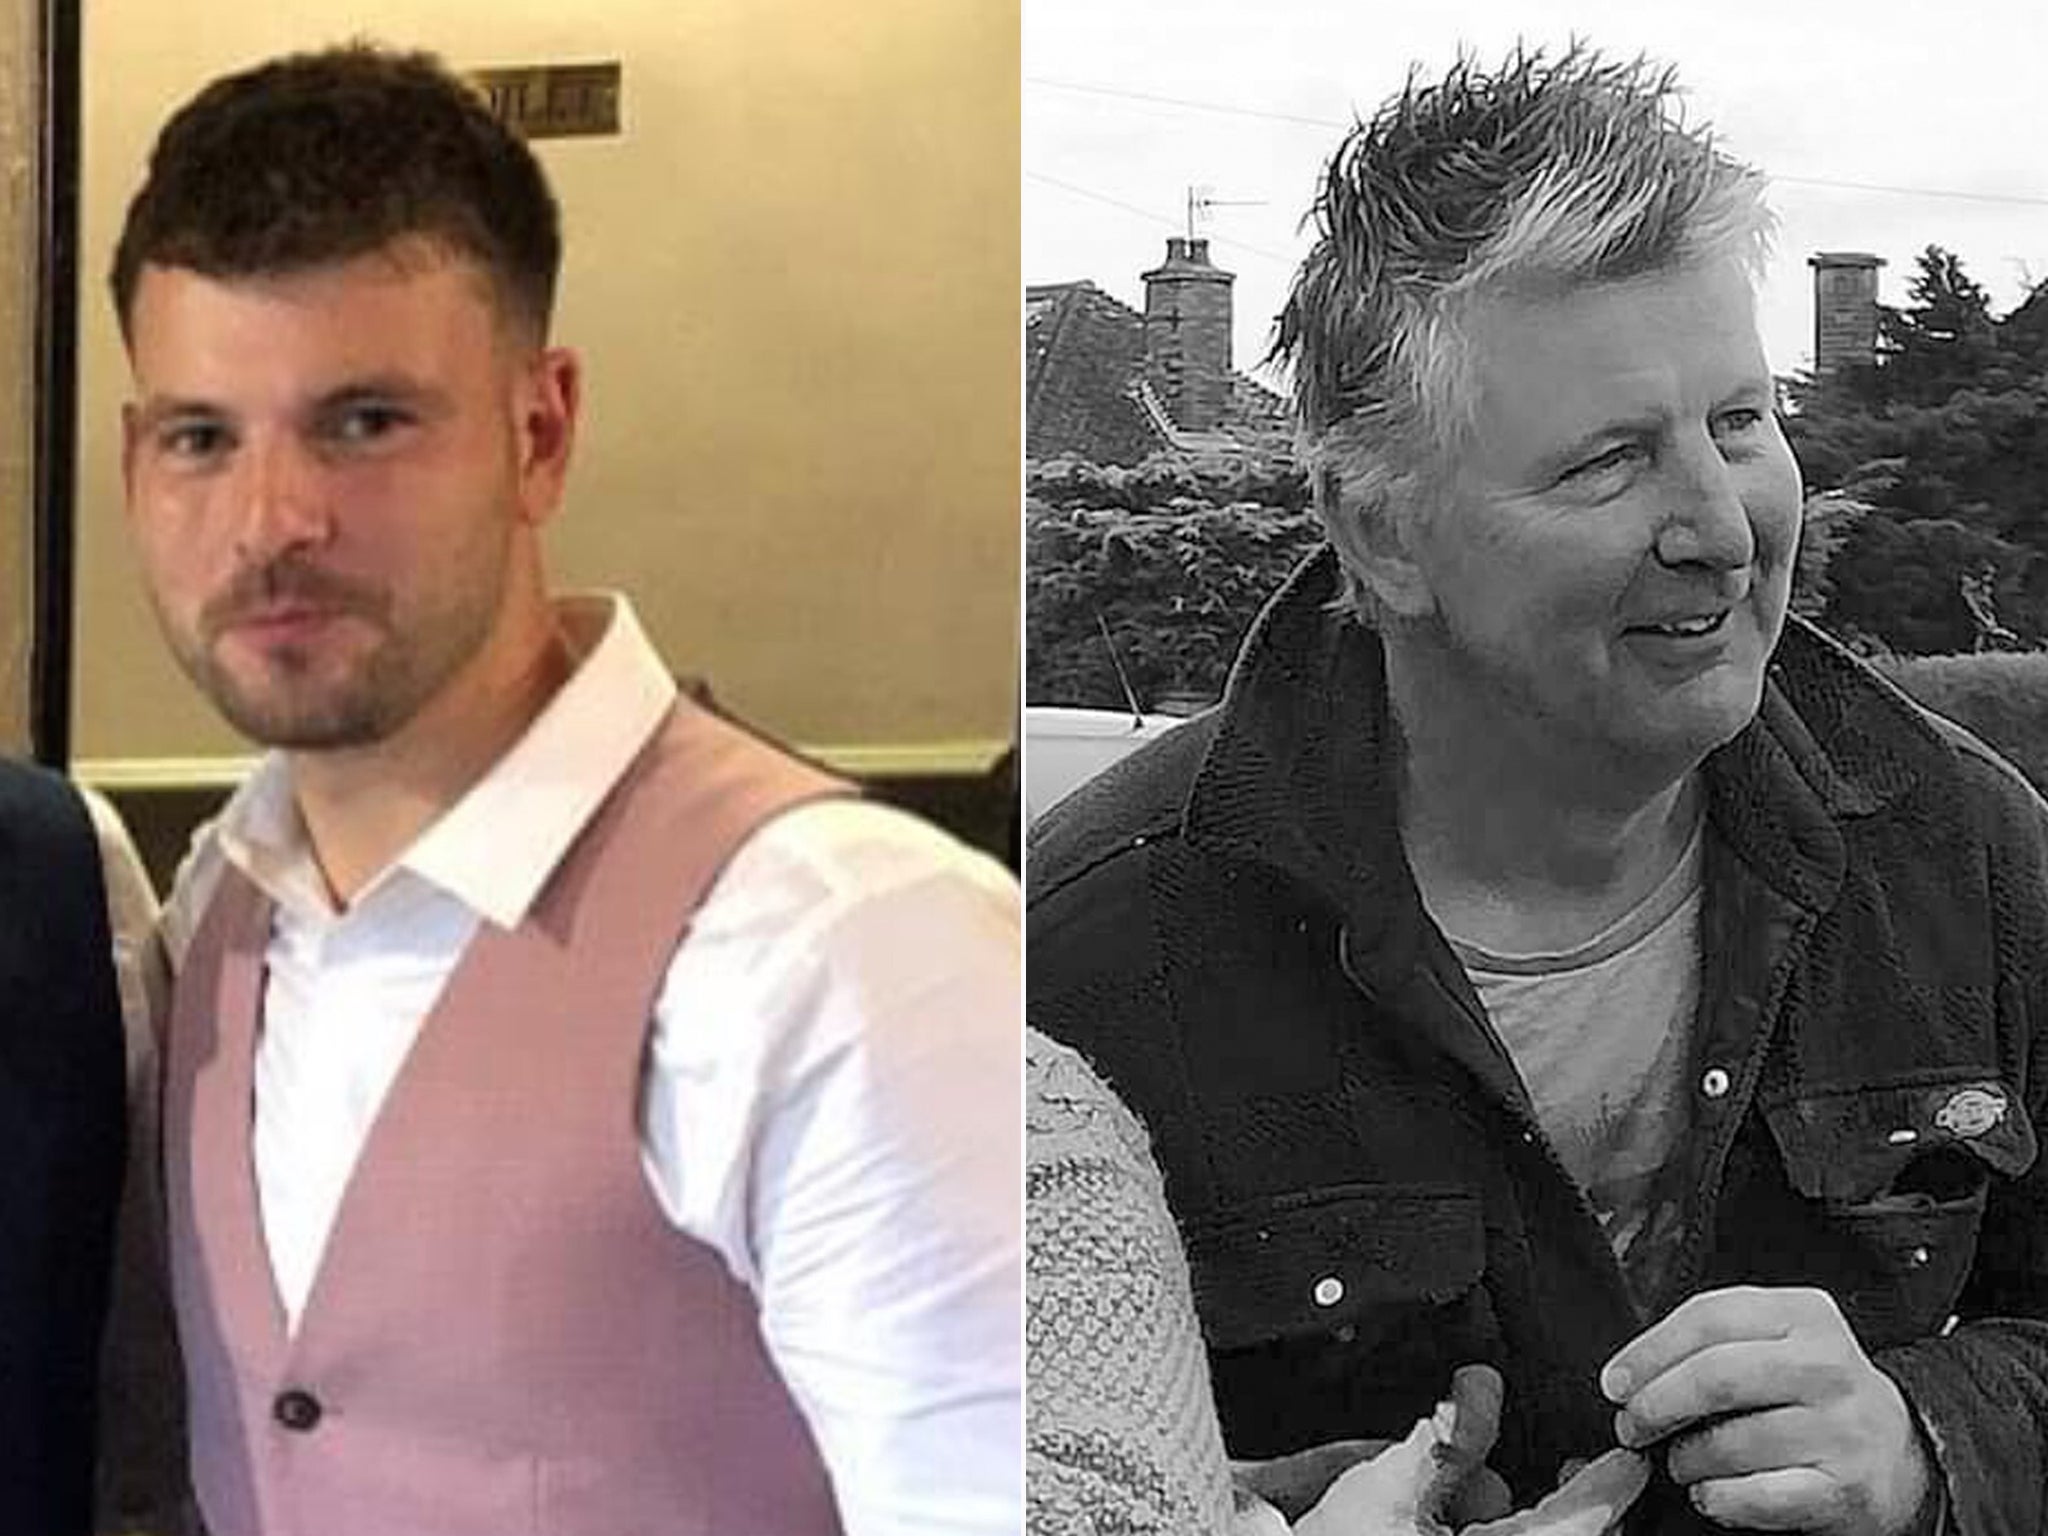 Joshua and Gary Dunmore were found dead in villages six miles apart